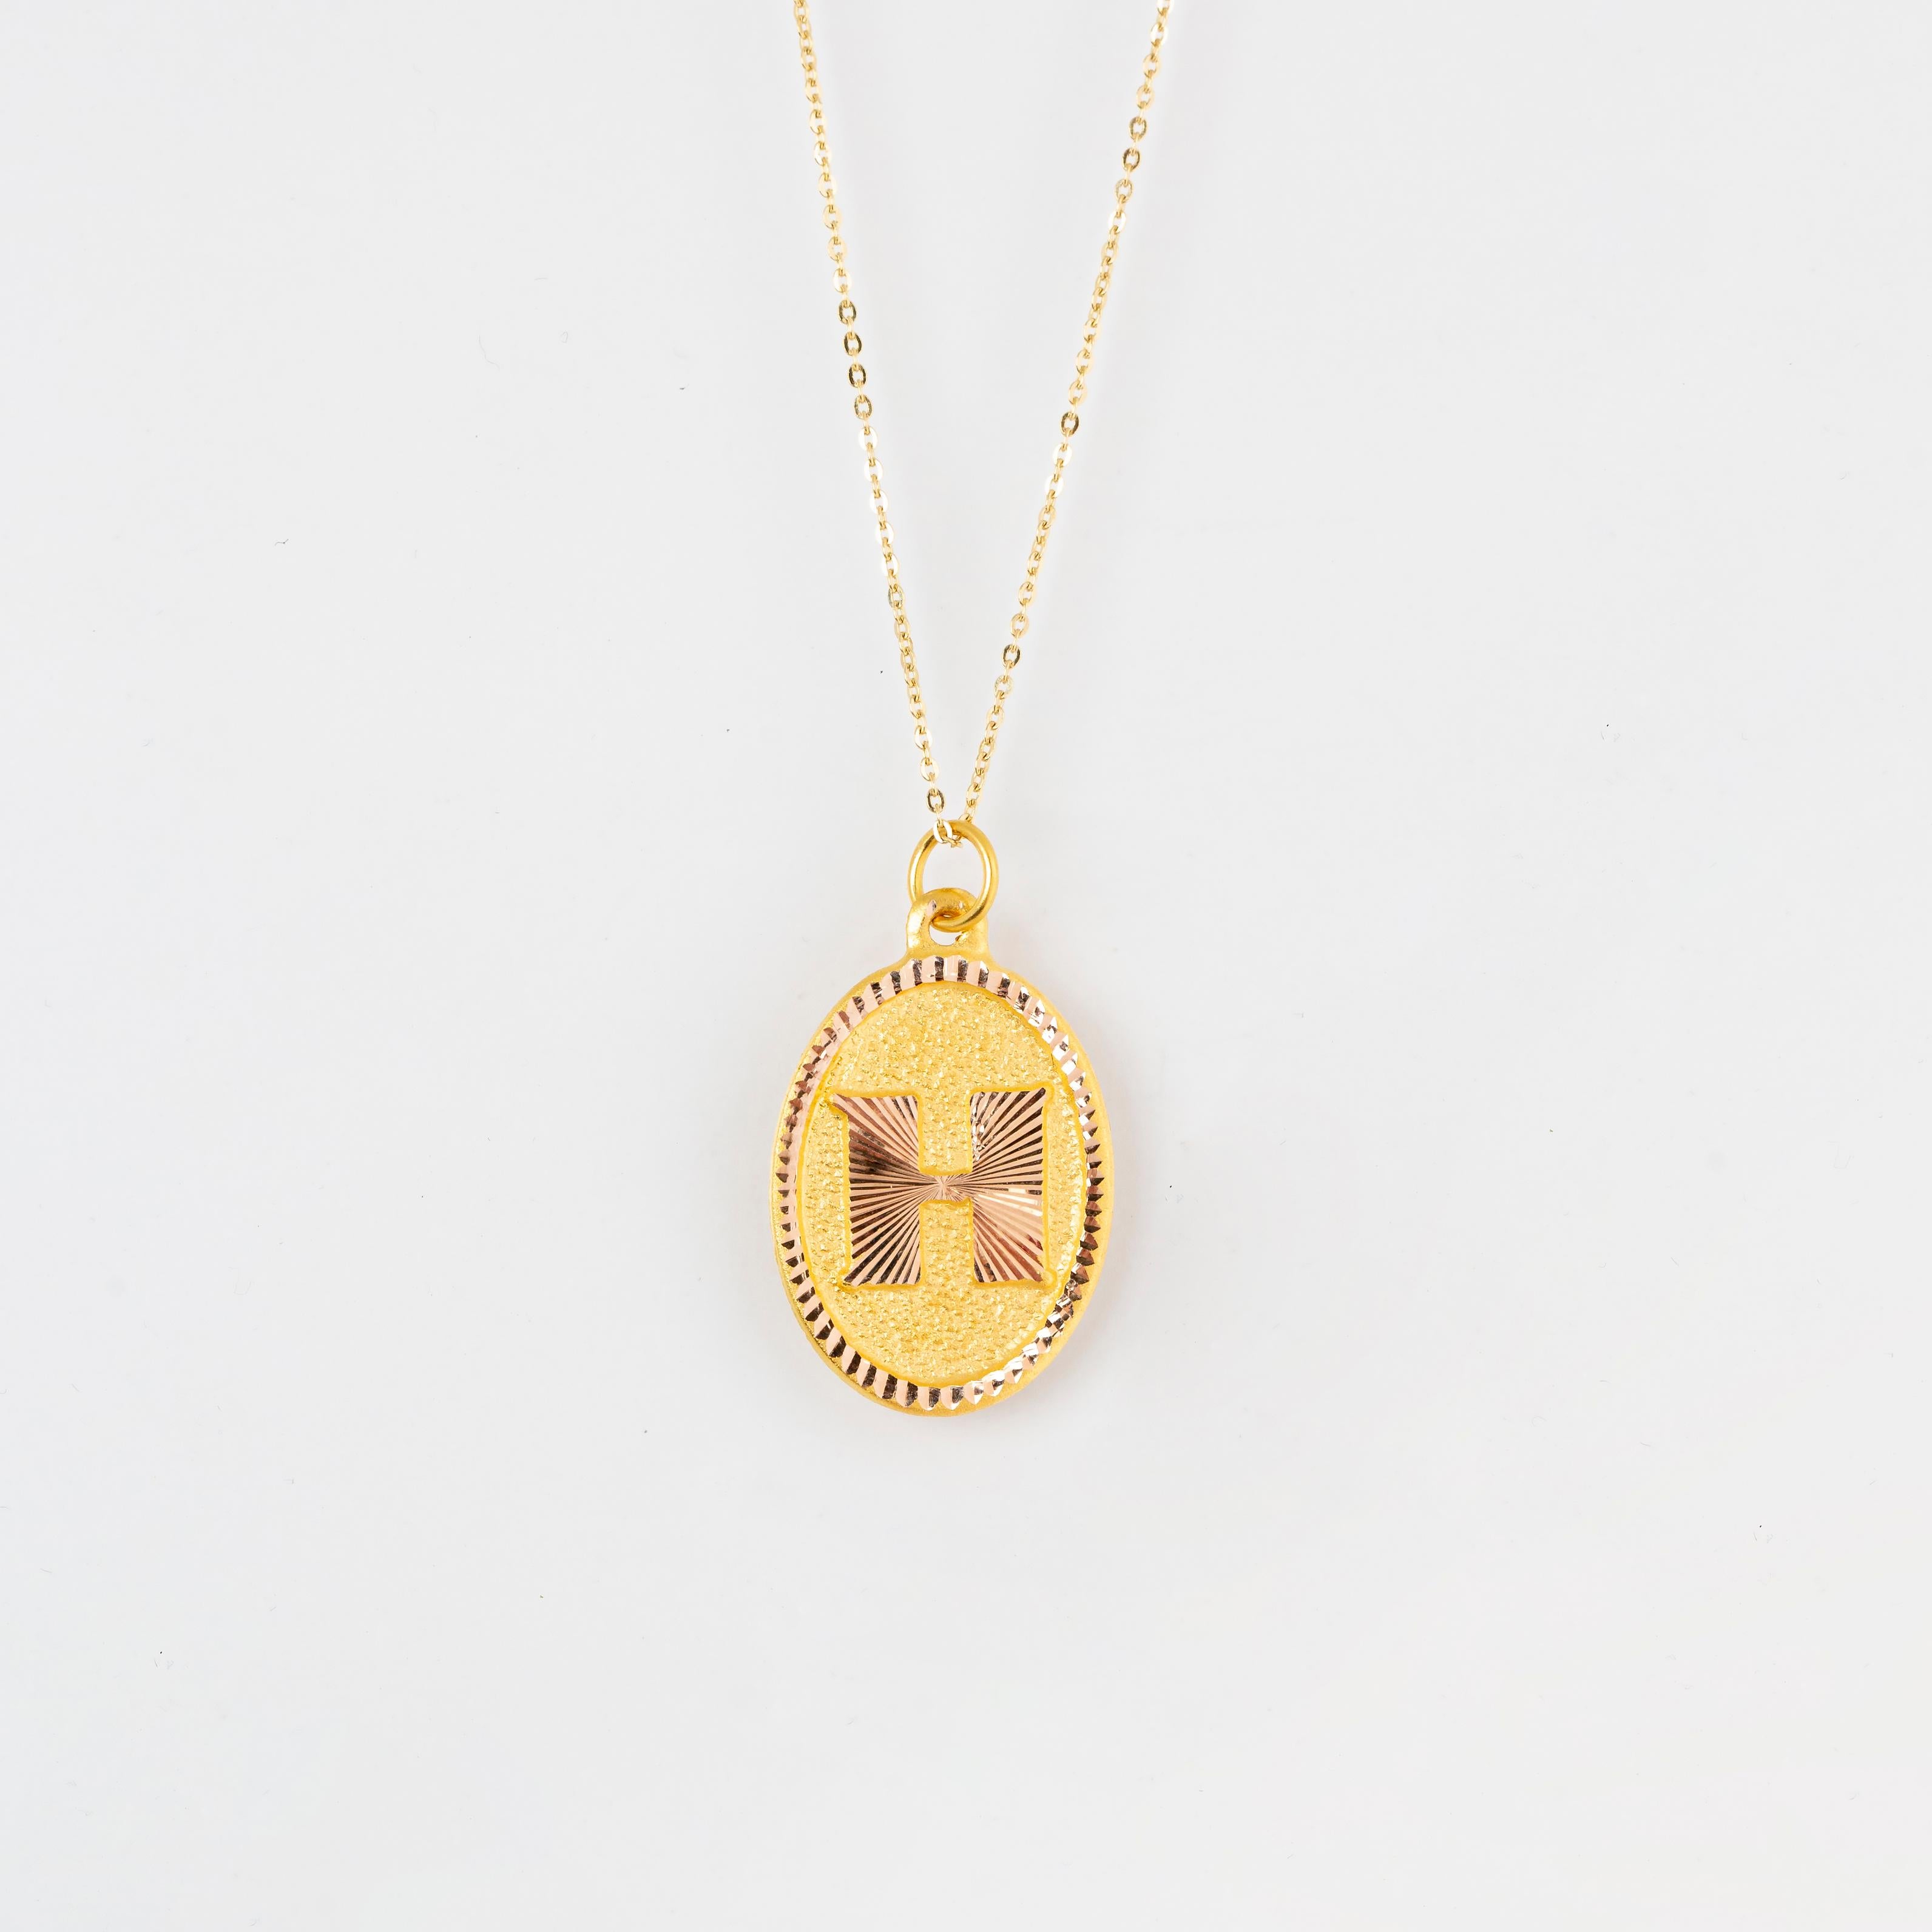 14K Gold Necklaces, Letter Necklace Models, Letter H Gold Necklace-Gift Necklace Models, Daily Necklaces, Letter Jewelry

It's a manual labor product. 'Handmade'. Fashionable product.

This necklace was made with quality materials and excellent